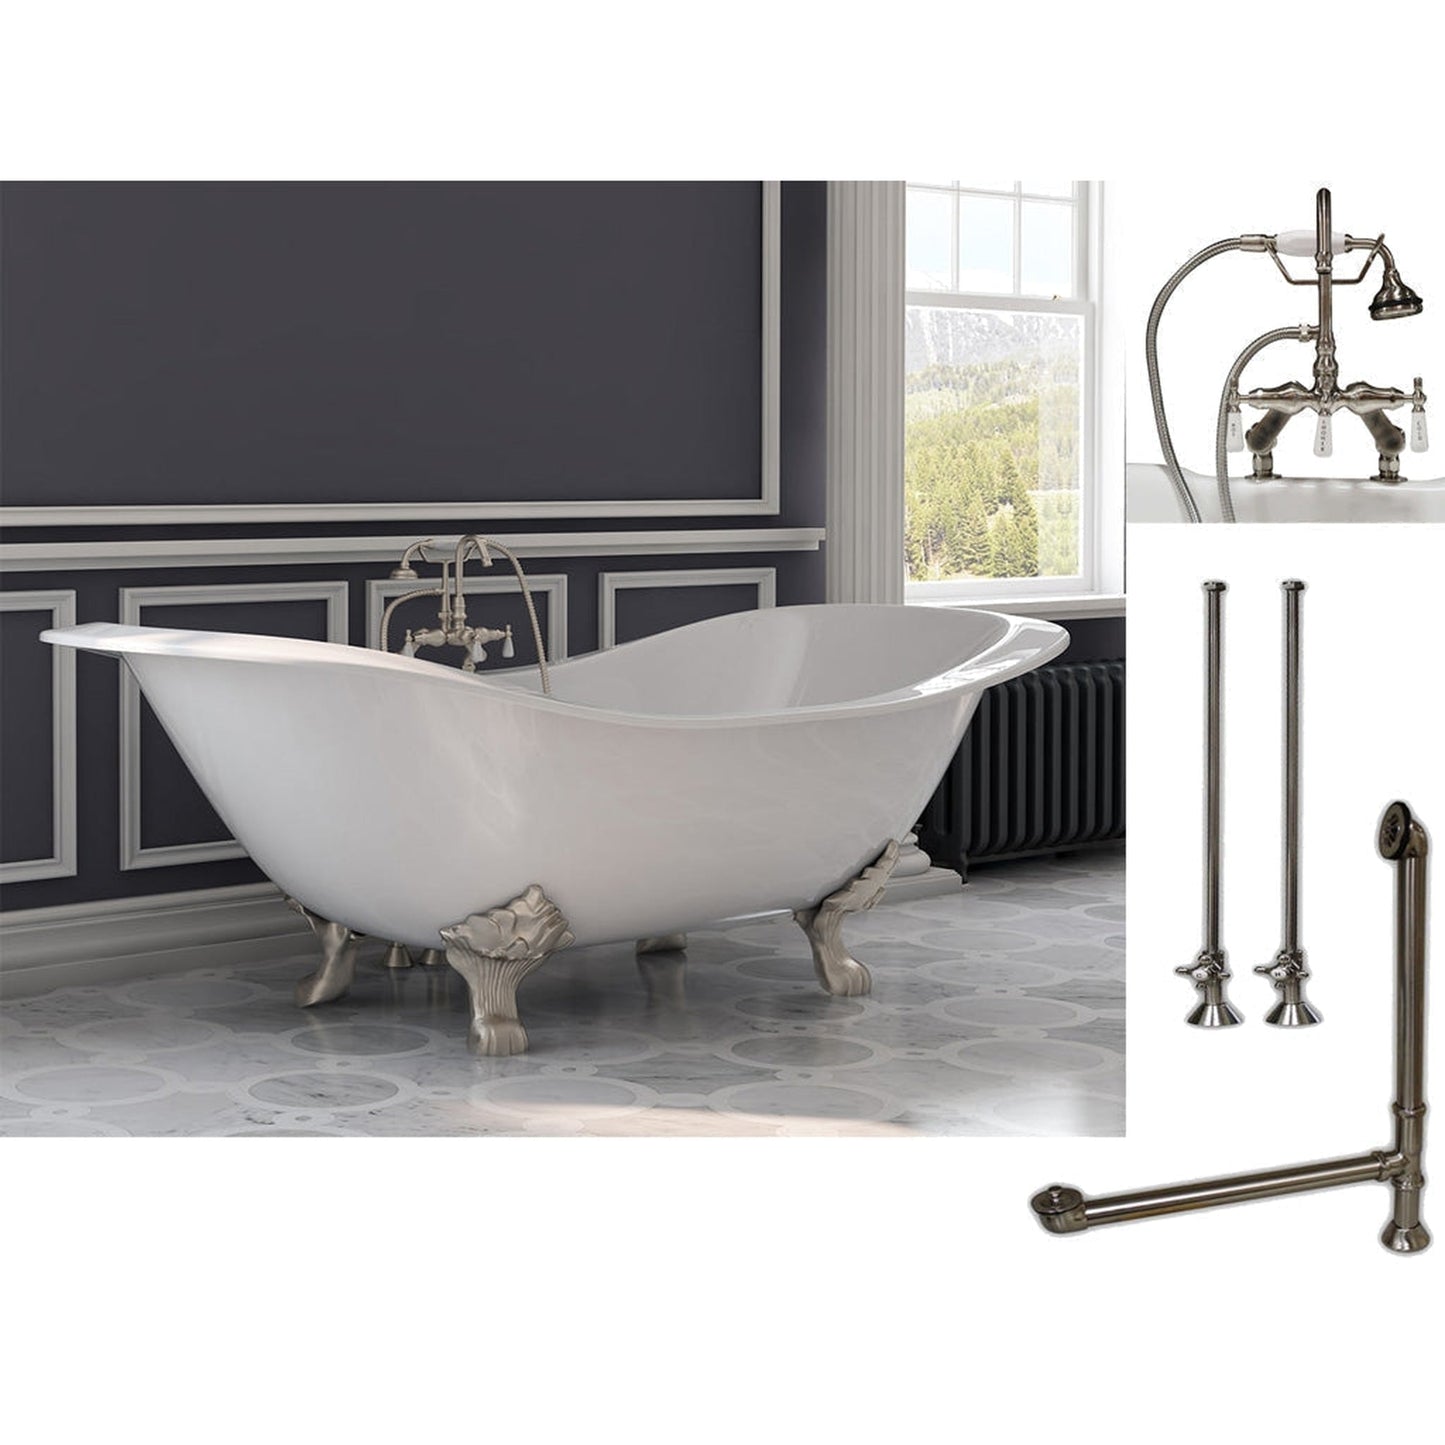 Cambridge Plumbing 72" White Cast Iron Double Slipper Clawfoot Bathtub With Deck Holes And Complete Plumbing Package Including Porcelain Lever English Telephone Brass Faucet, Supply Lines, Drain And Overflow Assembly In Brushed Nickel